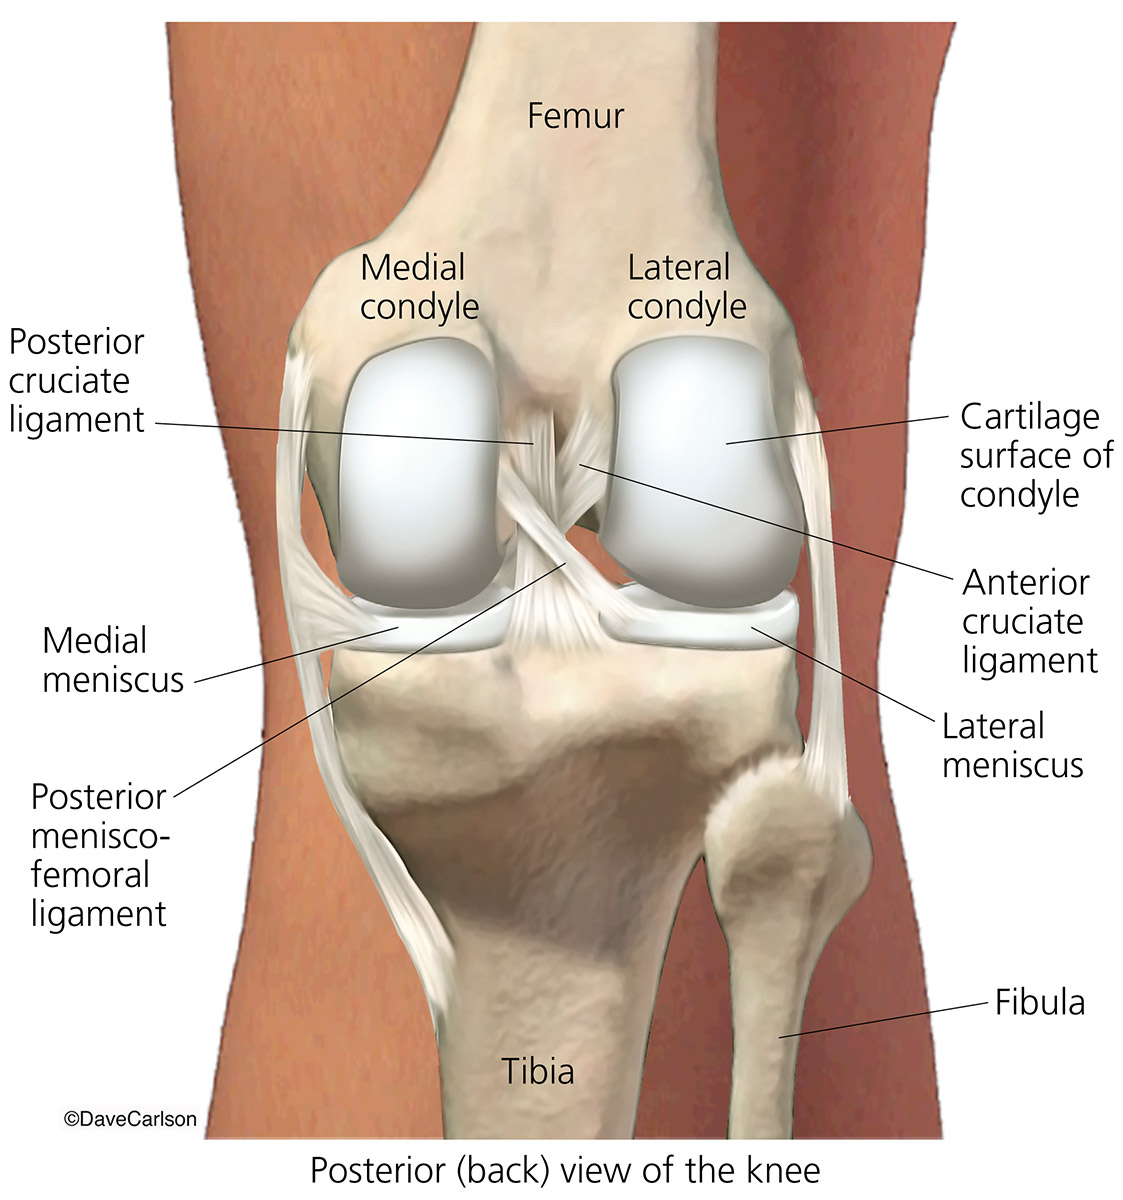 Illustration showing the human knee joint, including bones, ligaments and menisci (rear view)